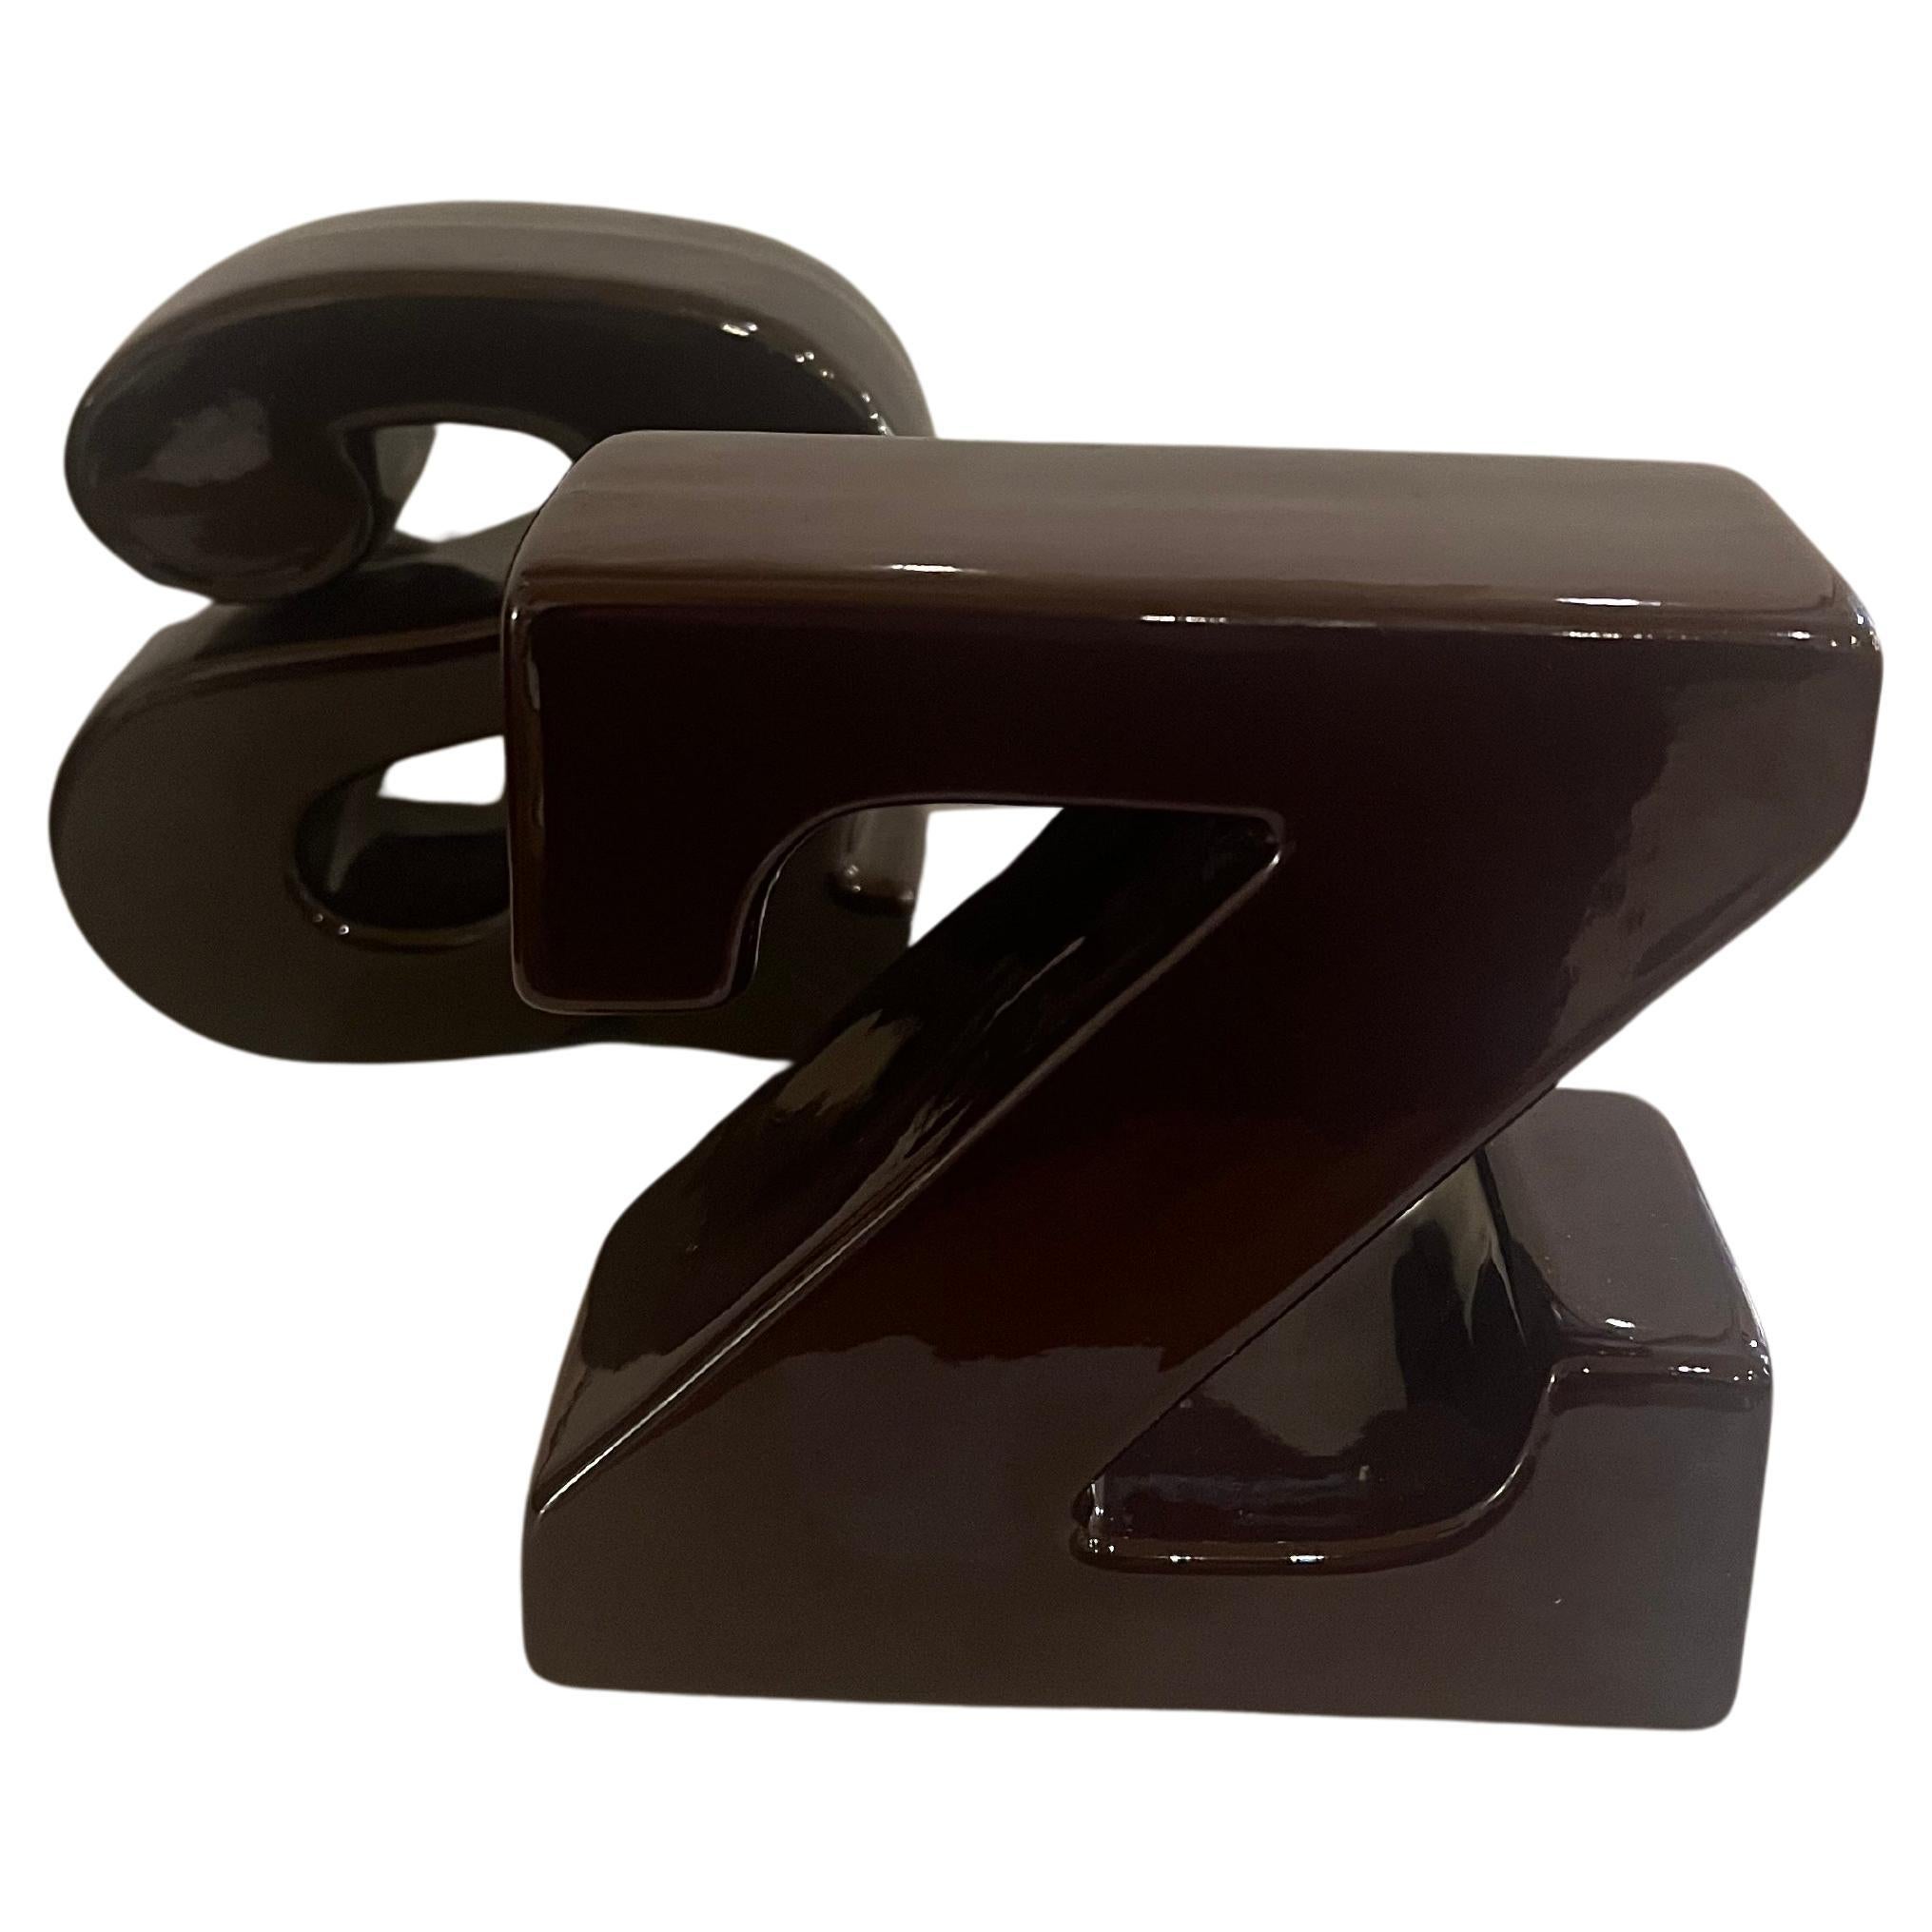 Fabulous pair of brown glossy ceramic Ato Z rare bookends, circa 1960 excellent condition no chips or cracks, very rare and hard to find great decor for space age, mid-century, or Danish Modern Style.